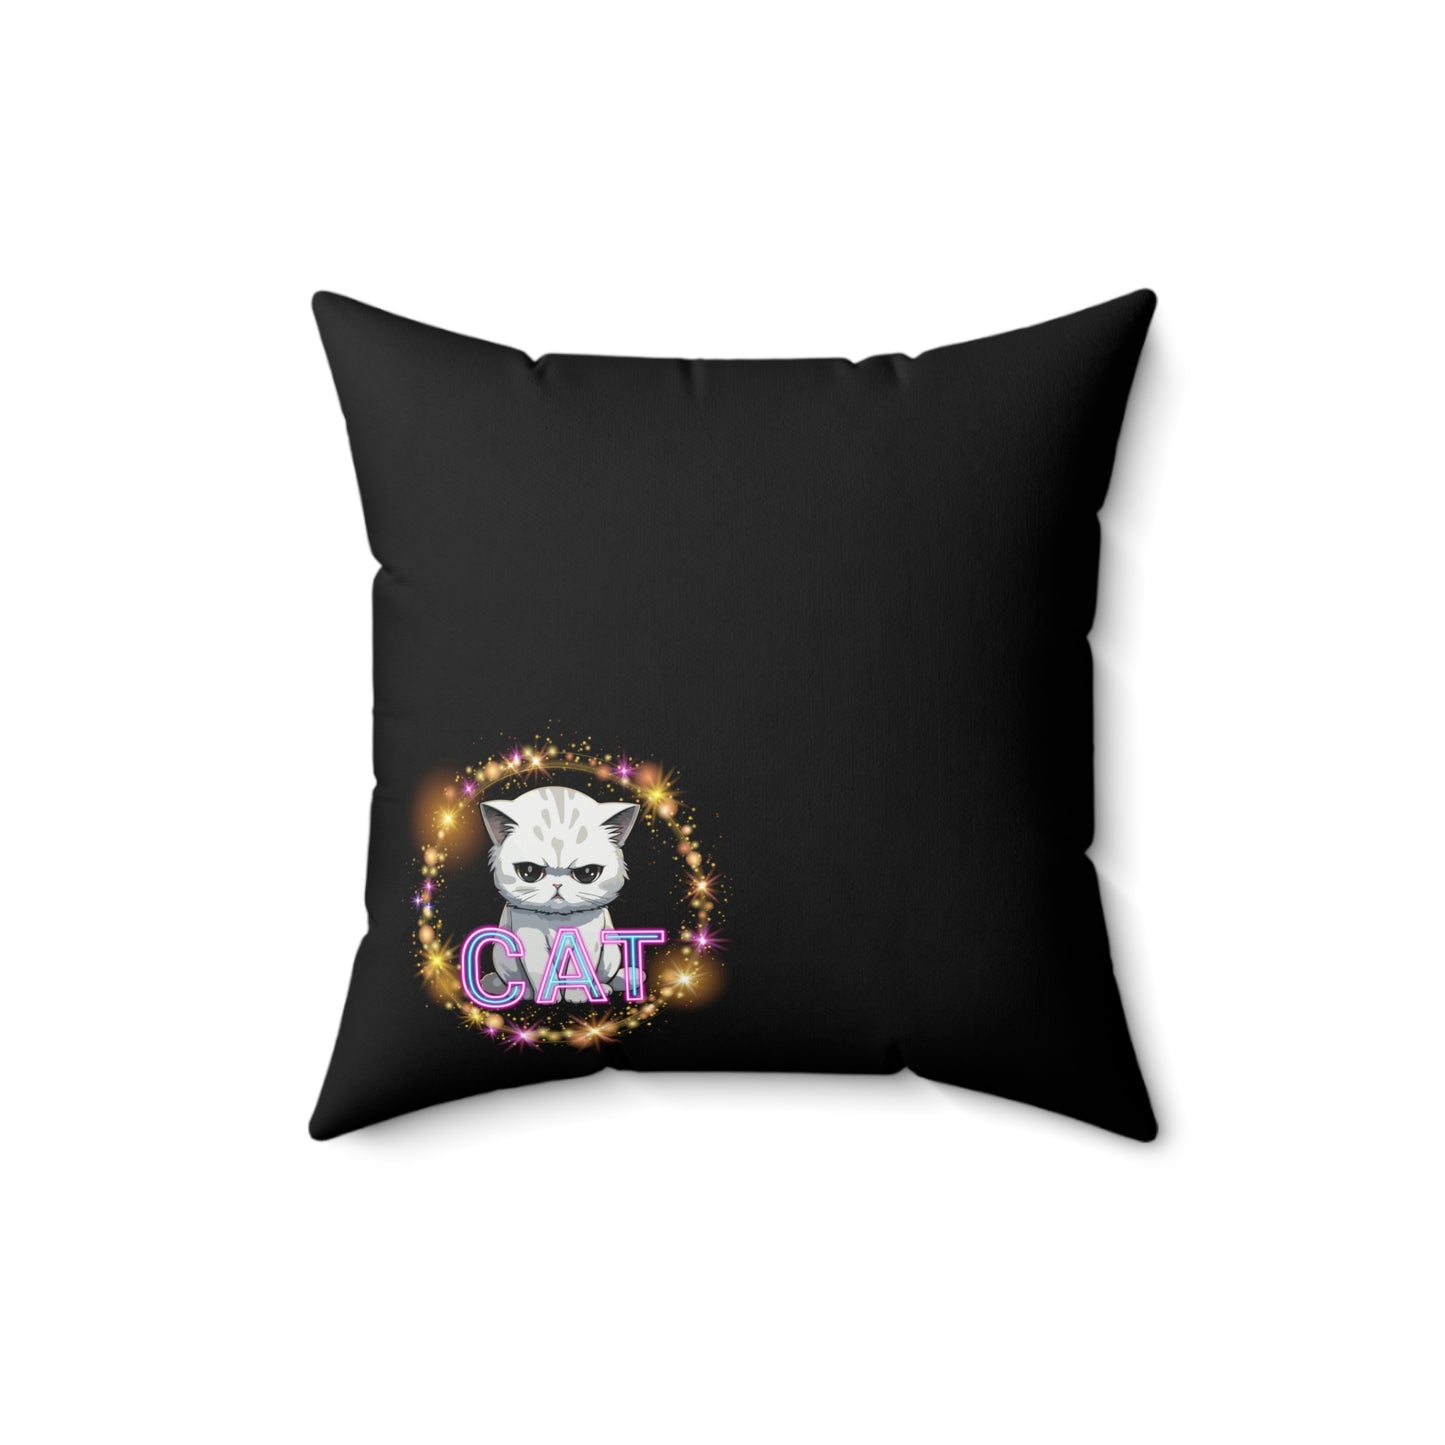 CAT Colorful logo with Cute Cat Design Spun Polyester Square Pillow